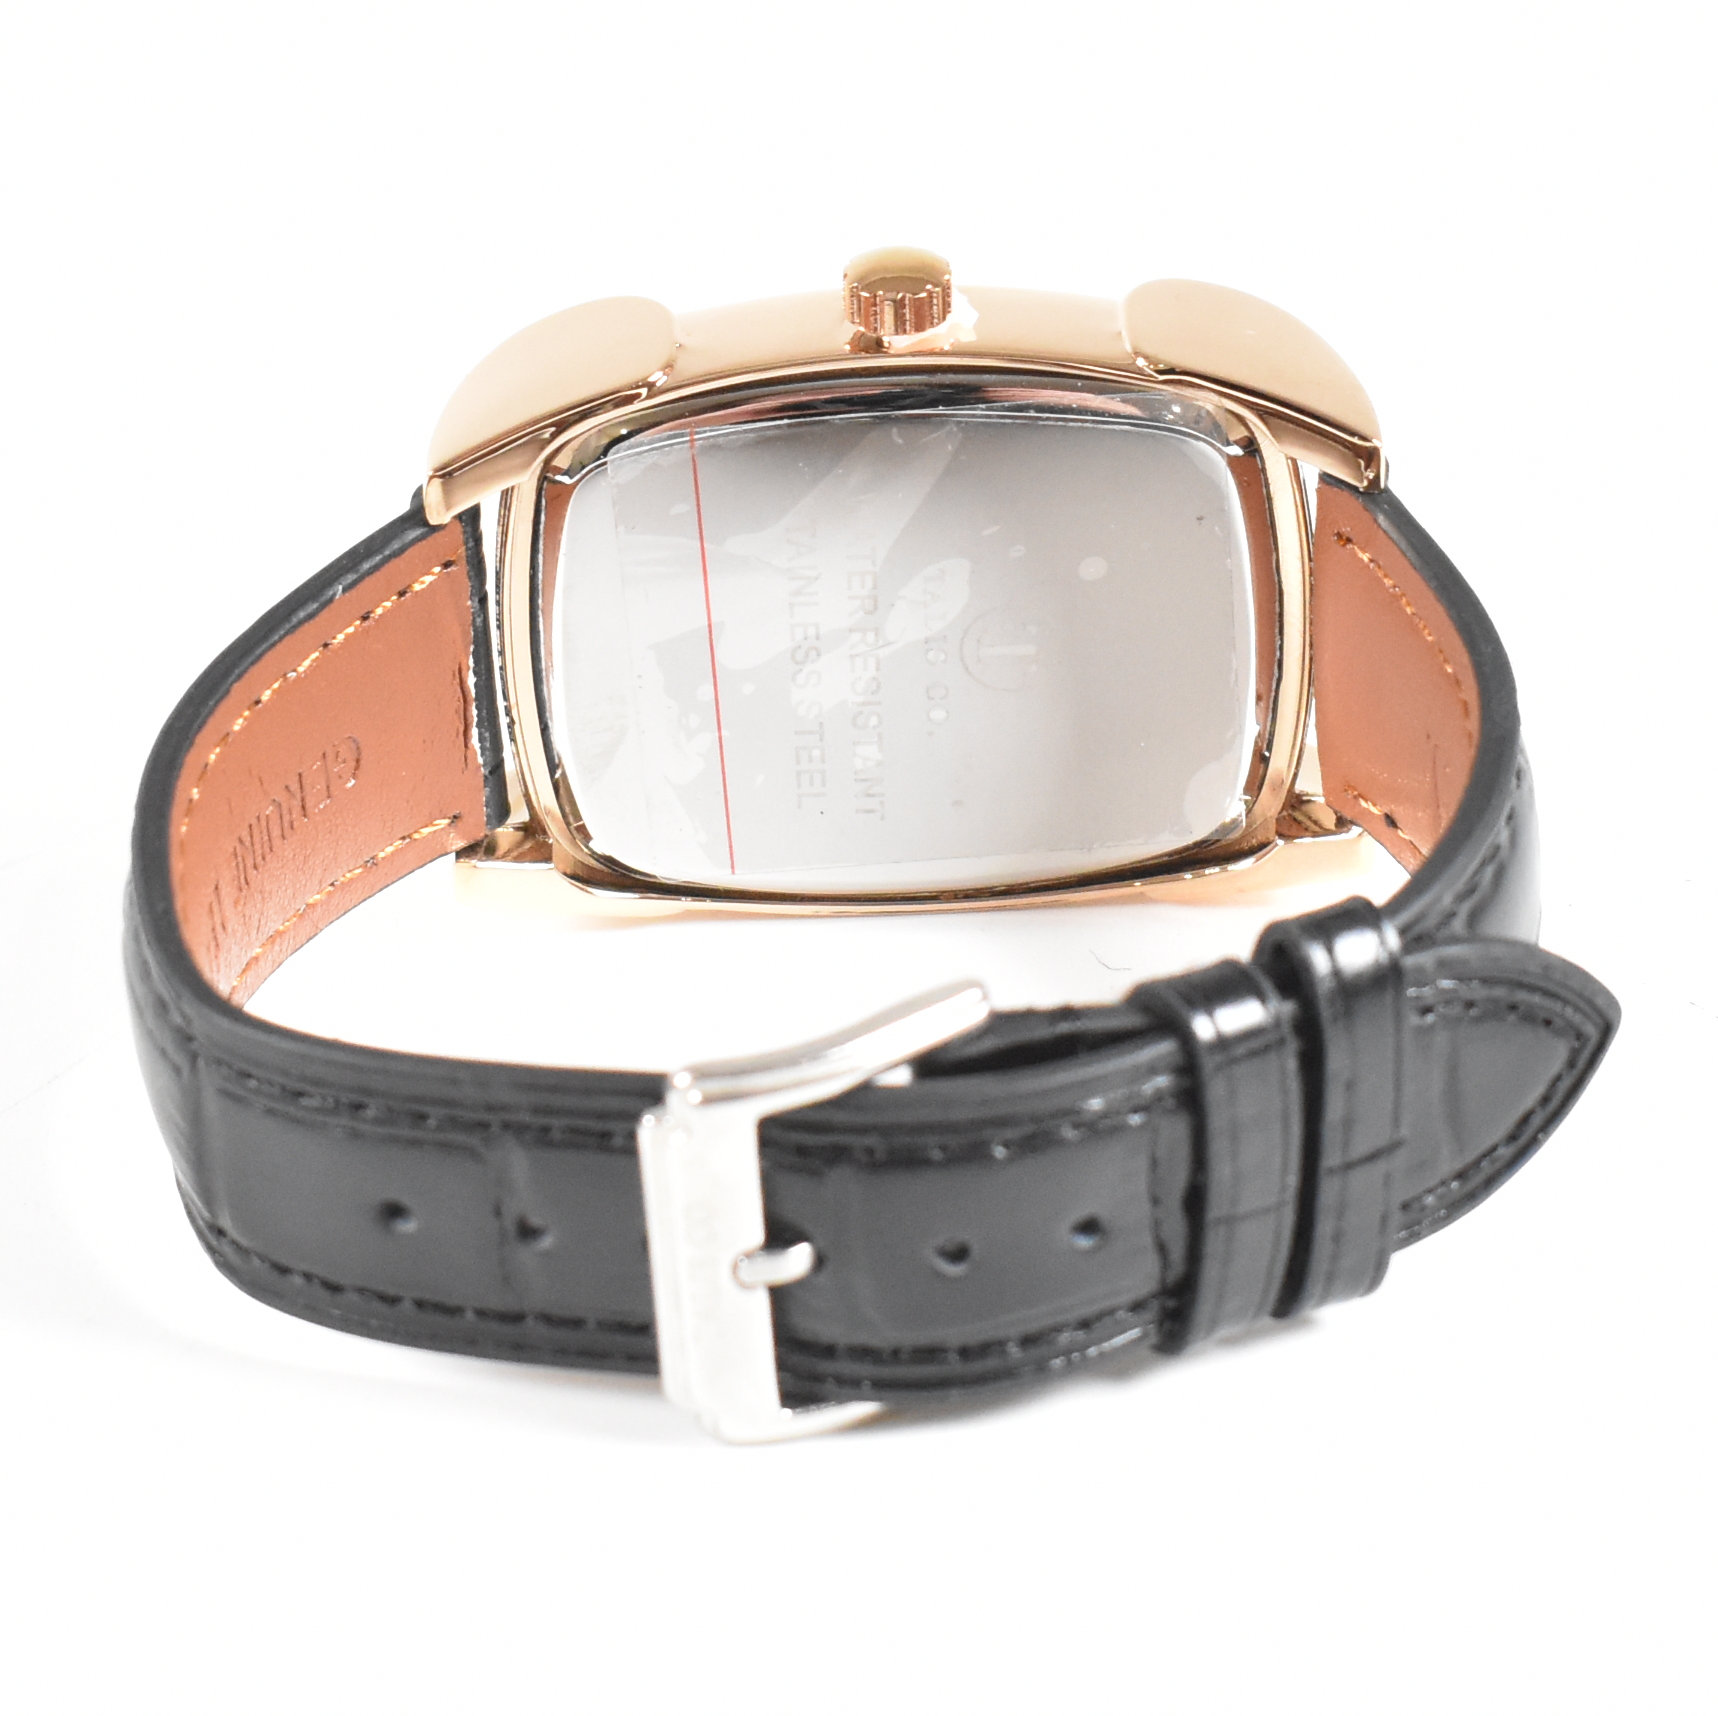 MENS TALIS CO WRIST WATCH - Image 5 of 5